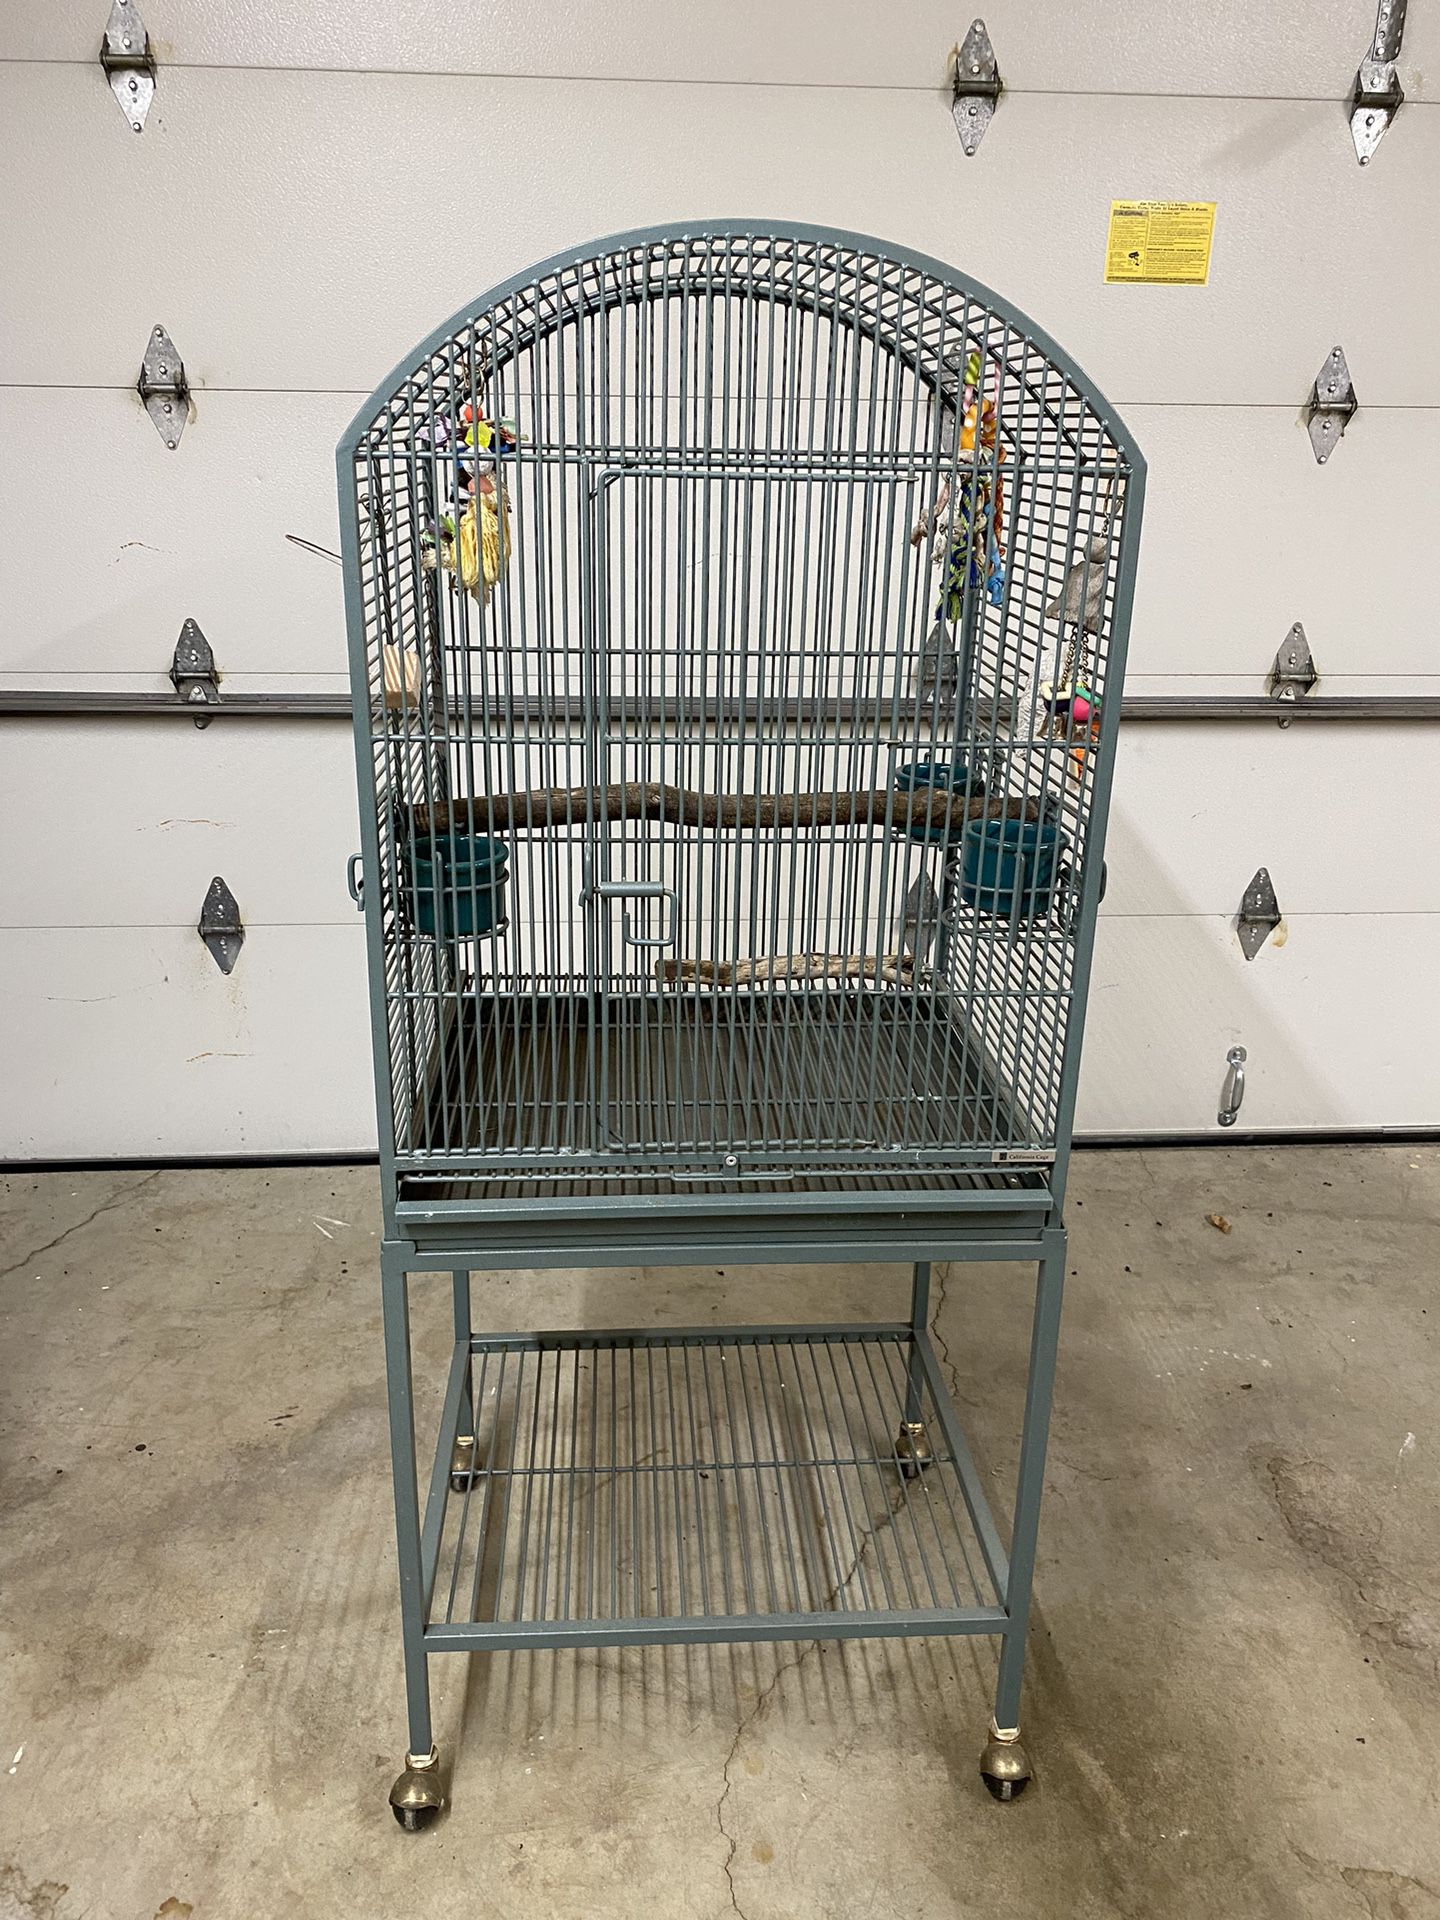 California Bird Cage With Spars And Food And Water Dishes.  Asking $250.00